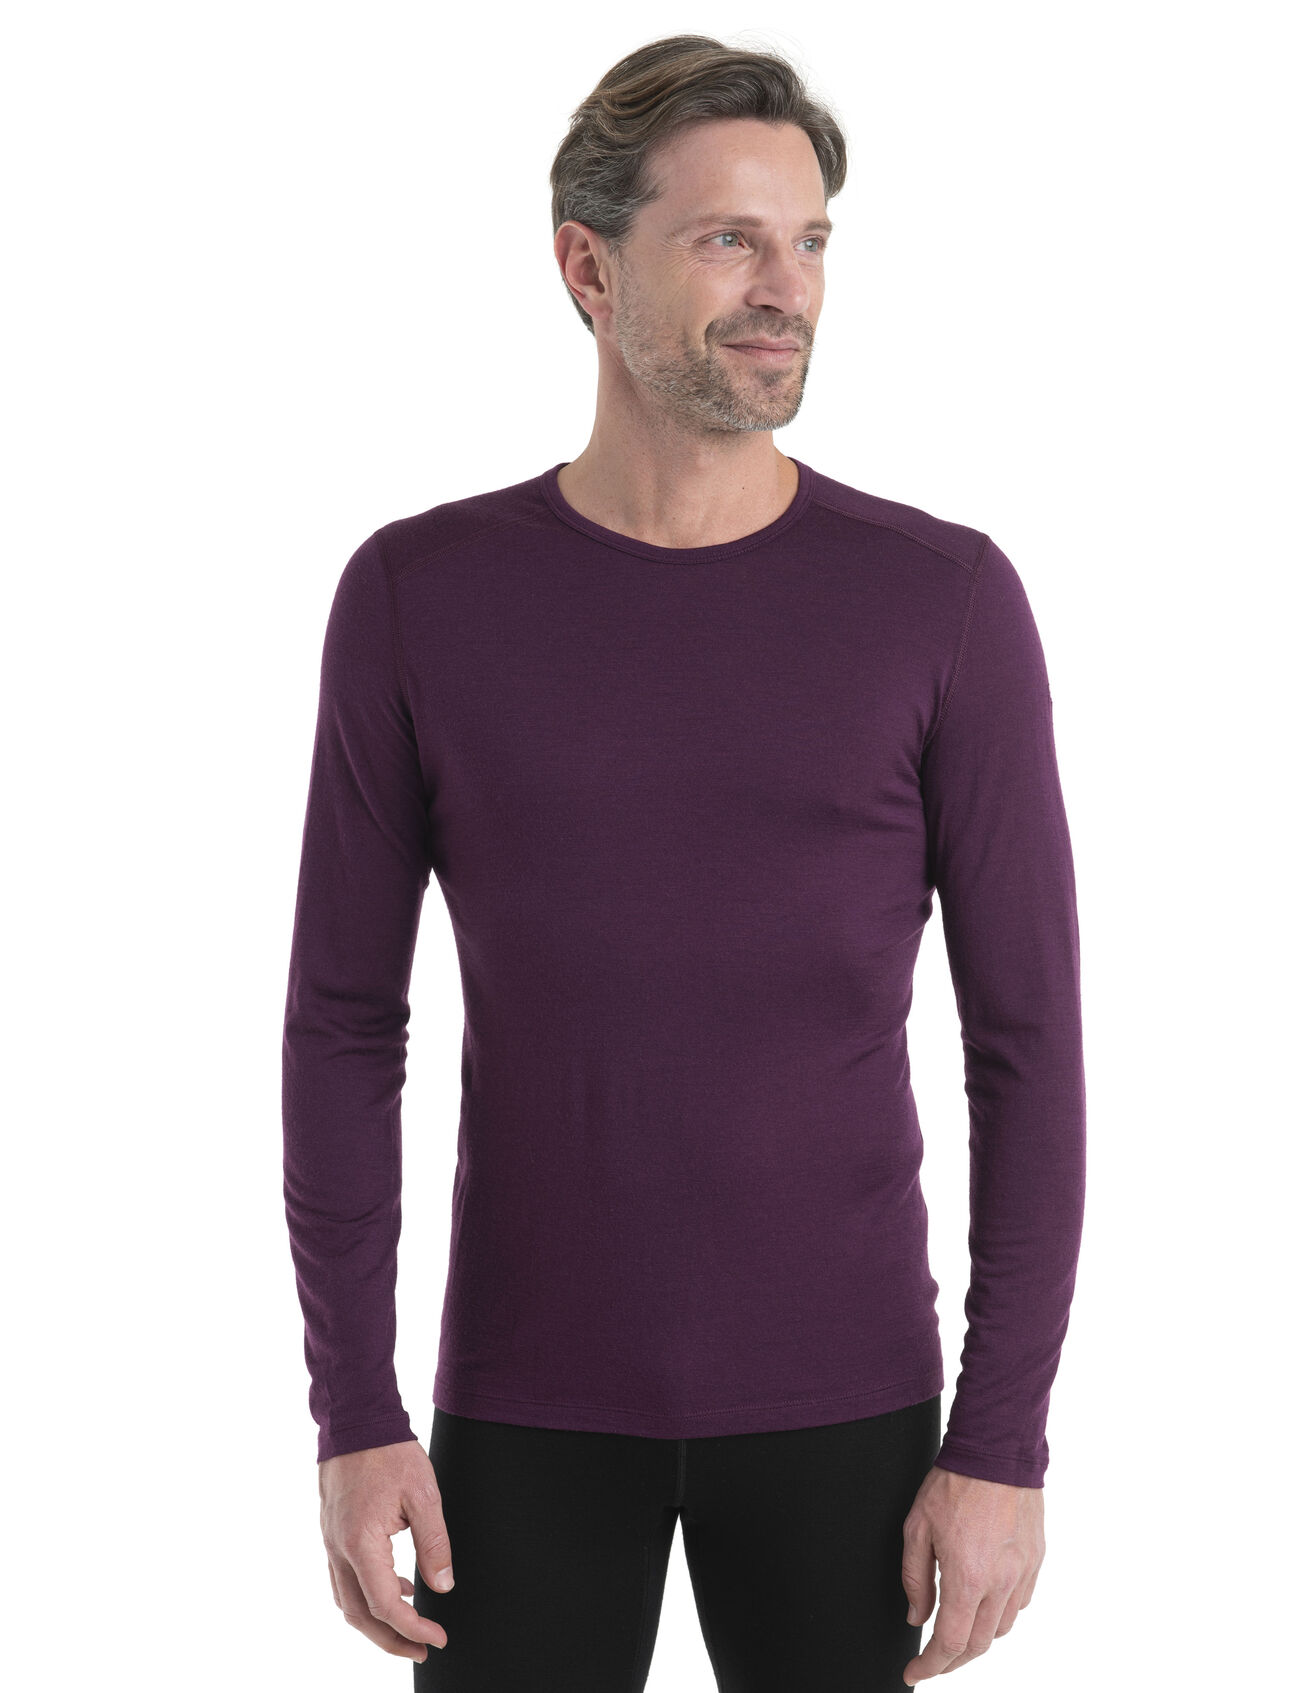 Haut col rond isotherme Oasis Long Sleeve Crewe 200 en mérinos